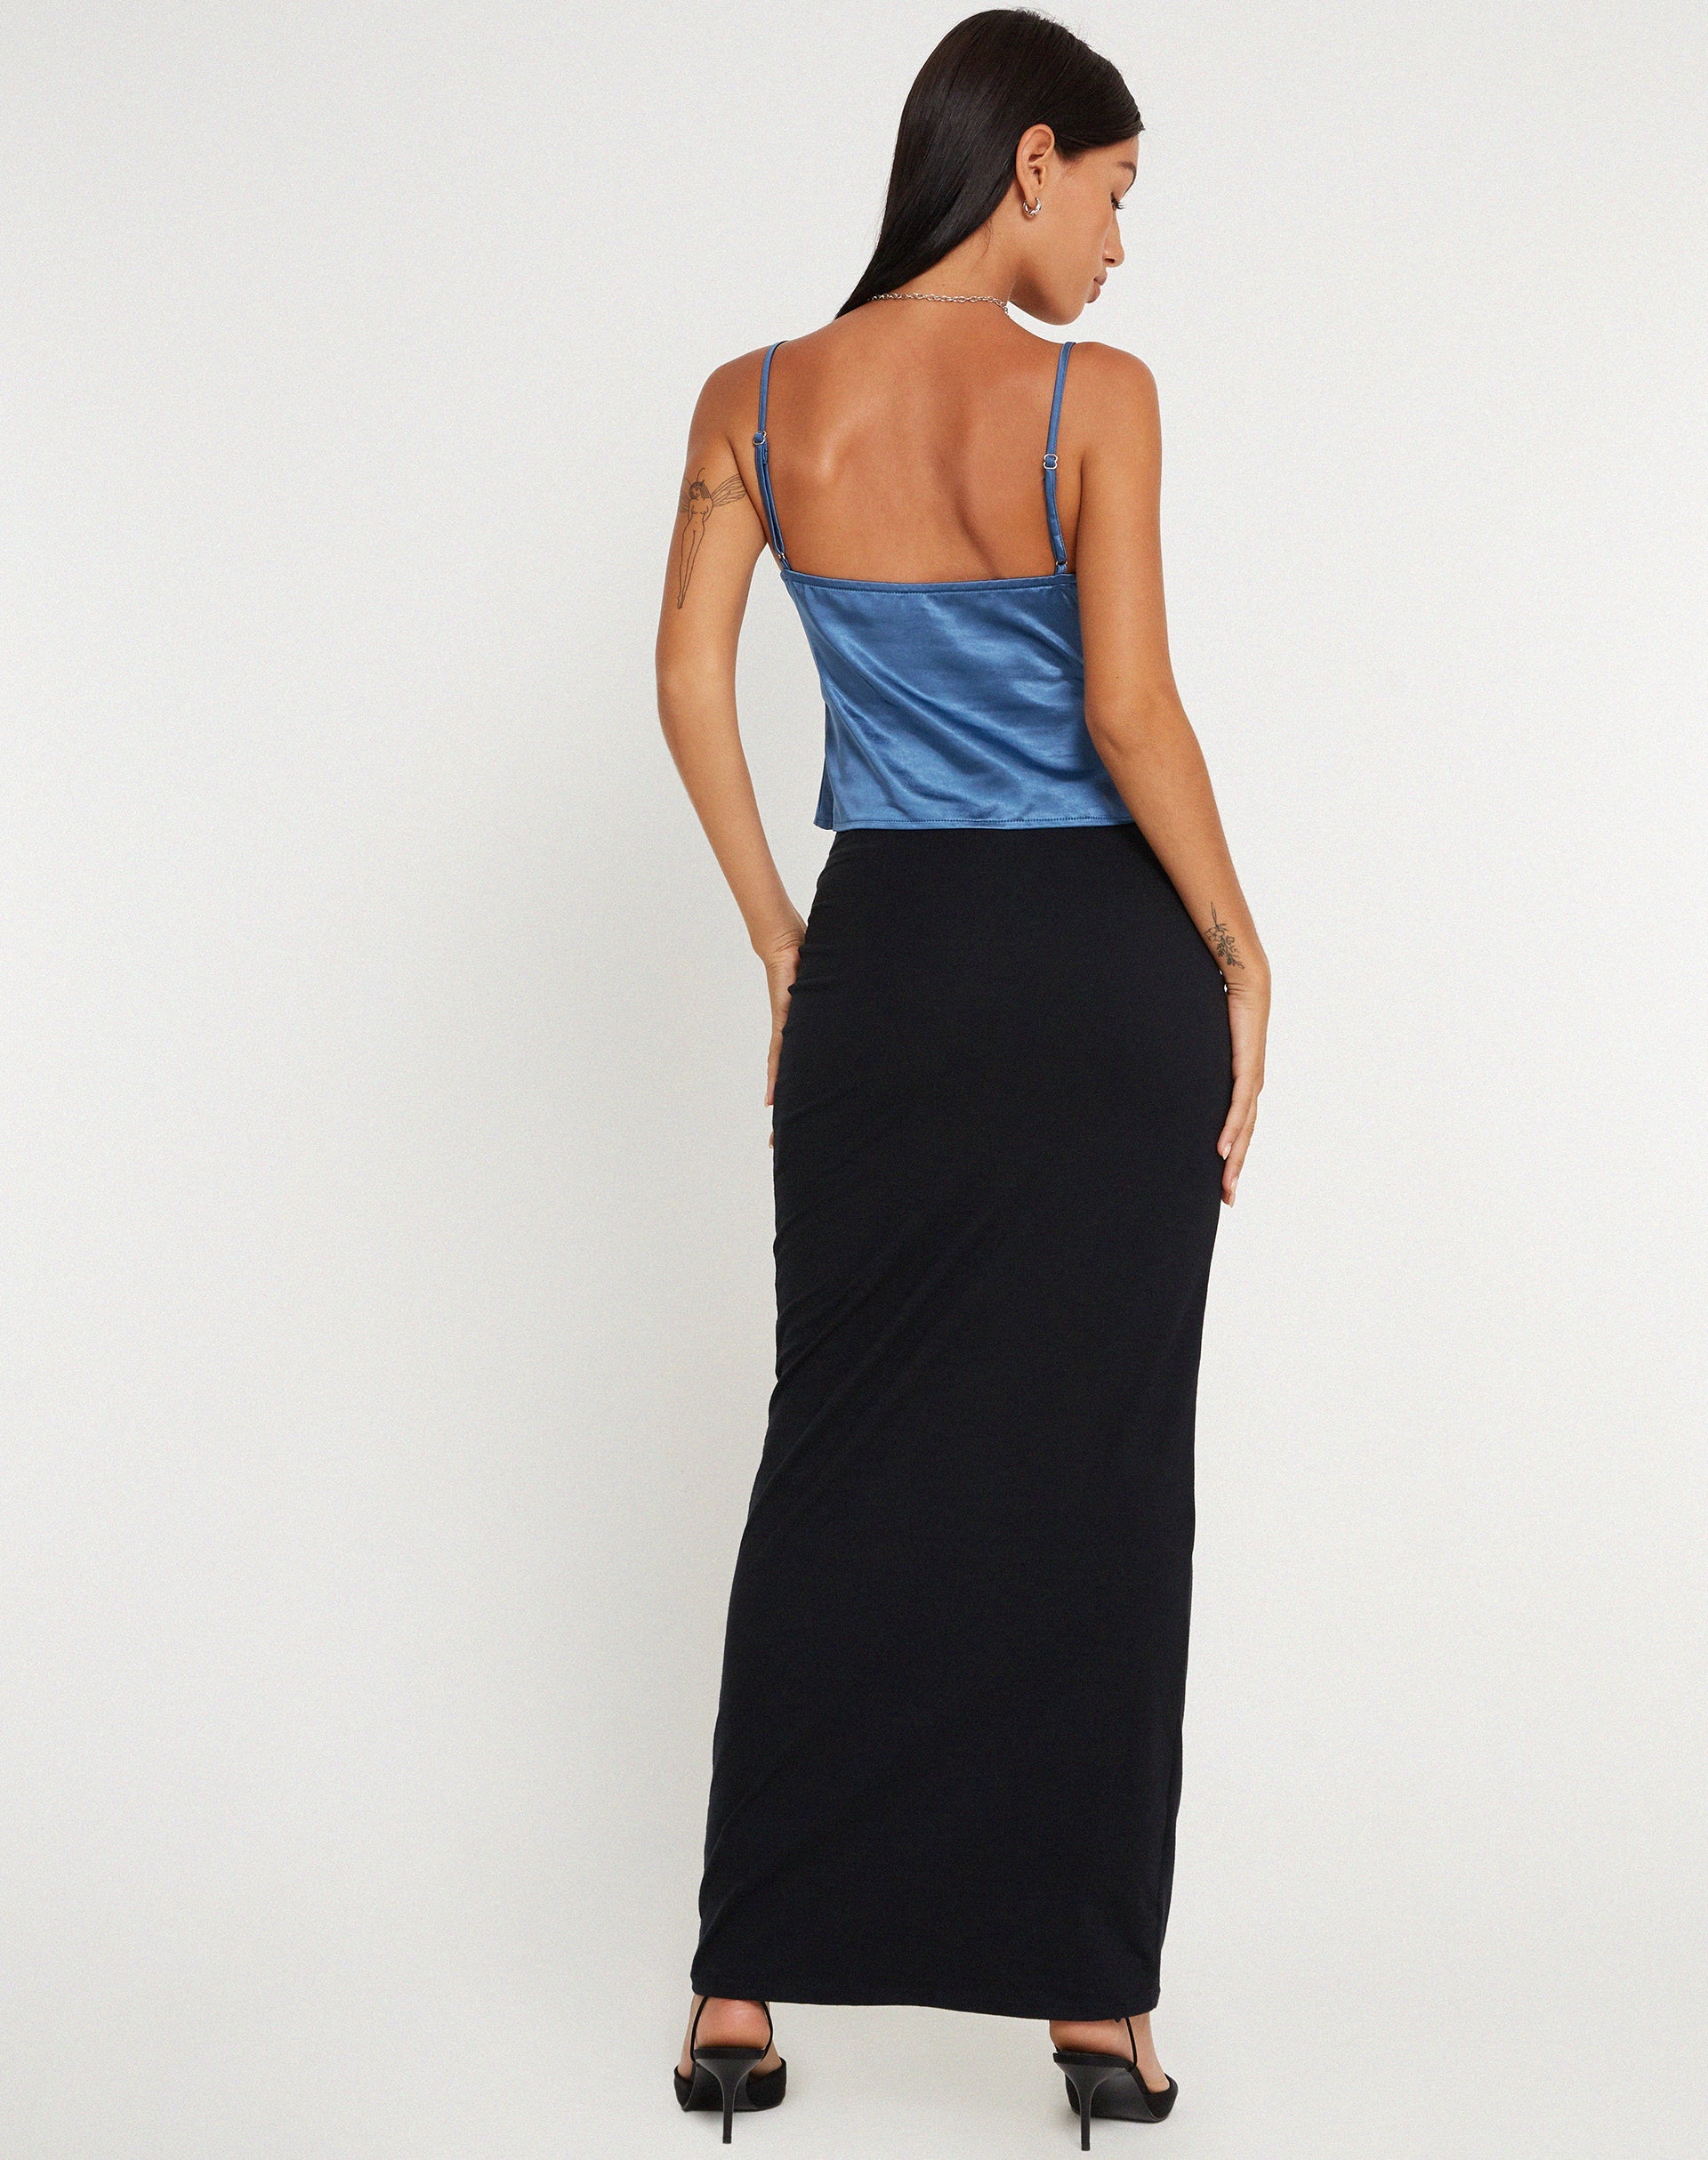 image of Apulia Butterfly Top in Satin Blue